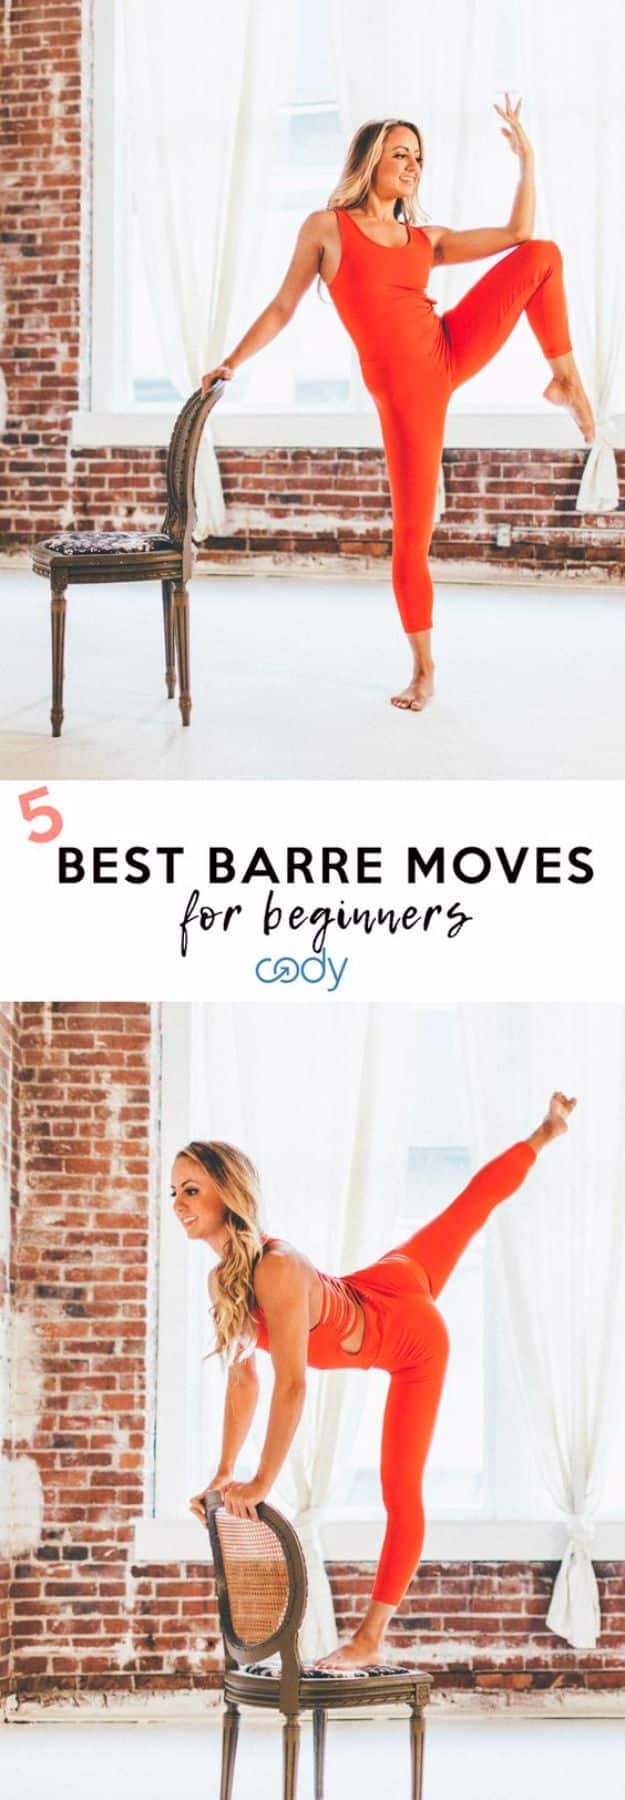 Best Exercises for 2018 - Ballet Barre Moves for Beginnners - Easy At Home Exercises - Quick Exercise Tutorials to Try at Lunch Break - Ways To Get In Shape - Butt, Abs, Arms, Legs, Thighs, Tummy http://diyjoy.com/best-at-home-exercises-2018